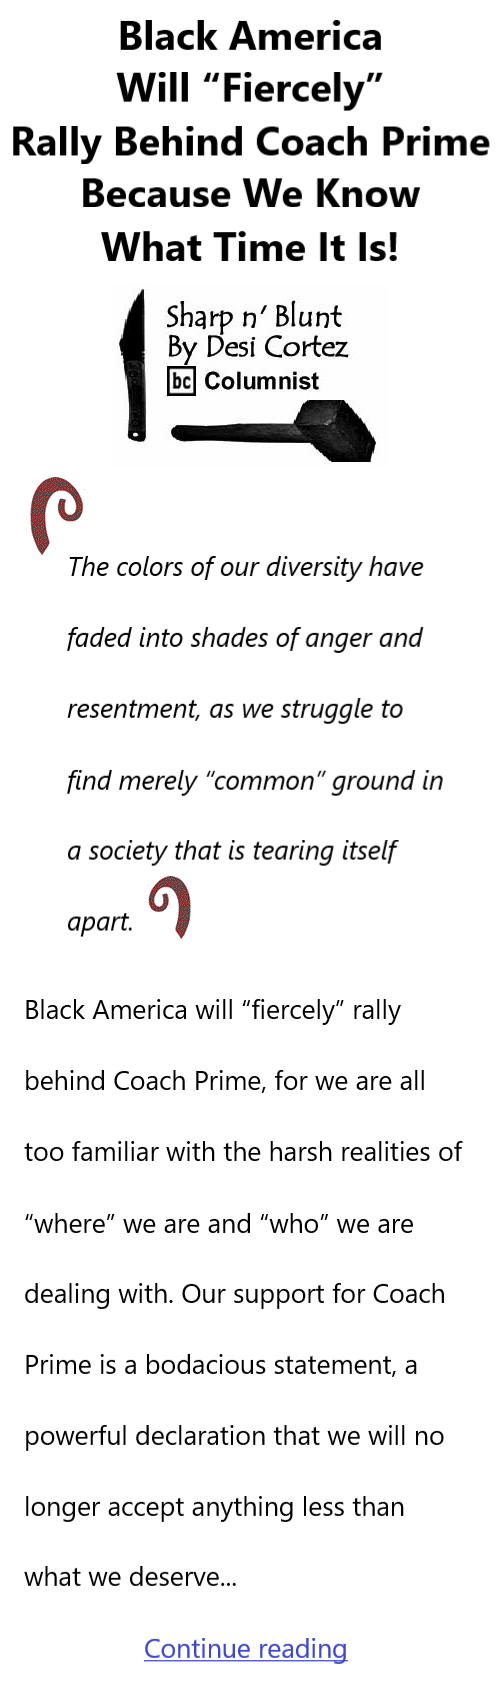 BlackCommentator.com Sept 28, 2023 - Issue 971: Black America Will “Fiercely” Rally Behind Coach Prime Because We Know What Time It Is! - Sharp n' Blunt By Desi Cortez, BC Columnist